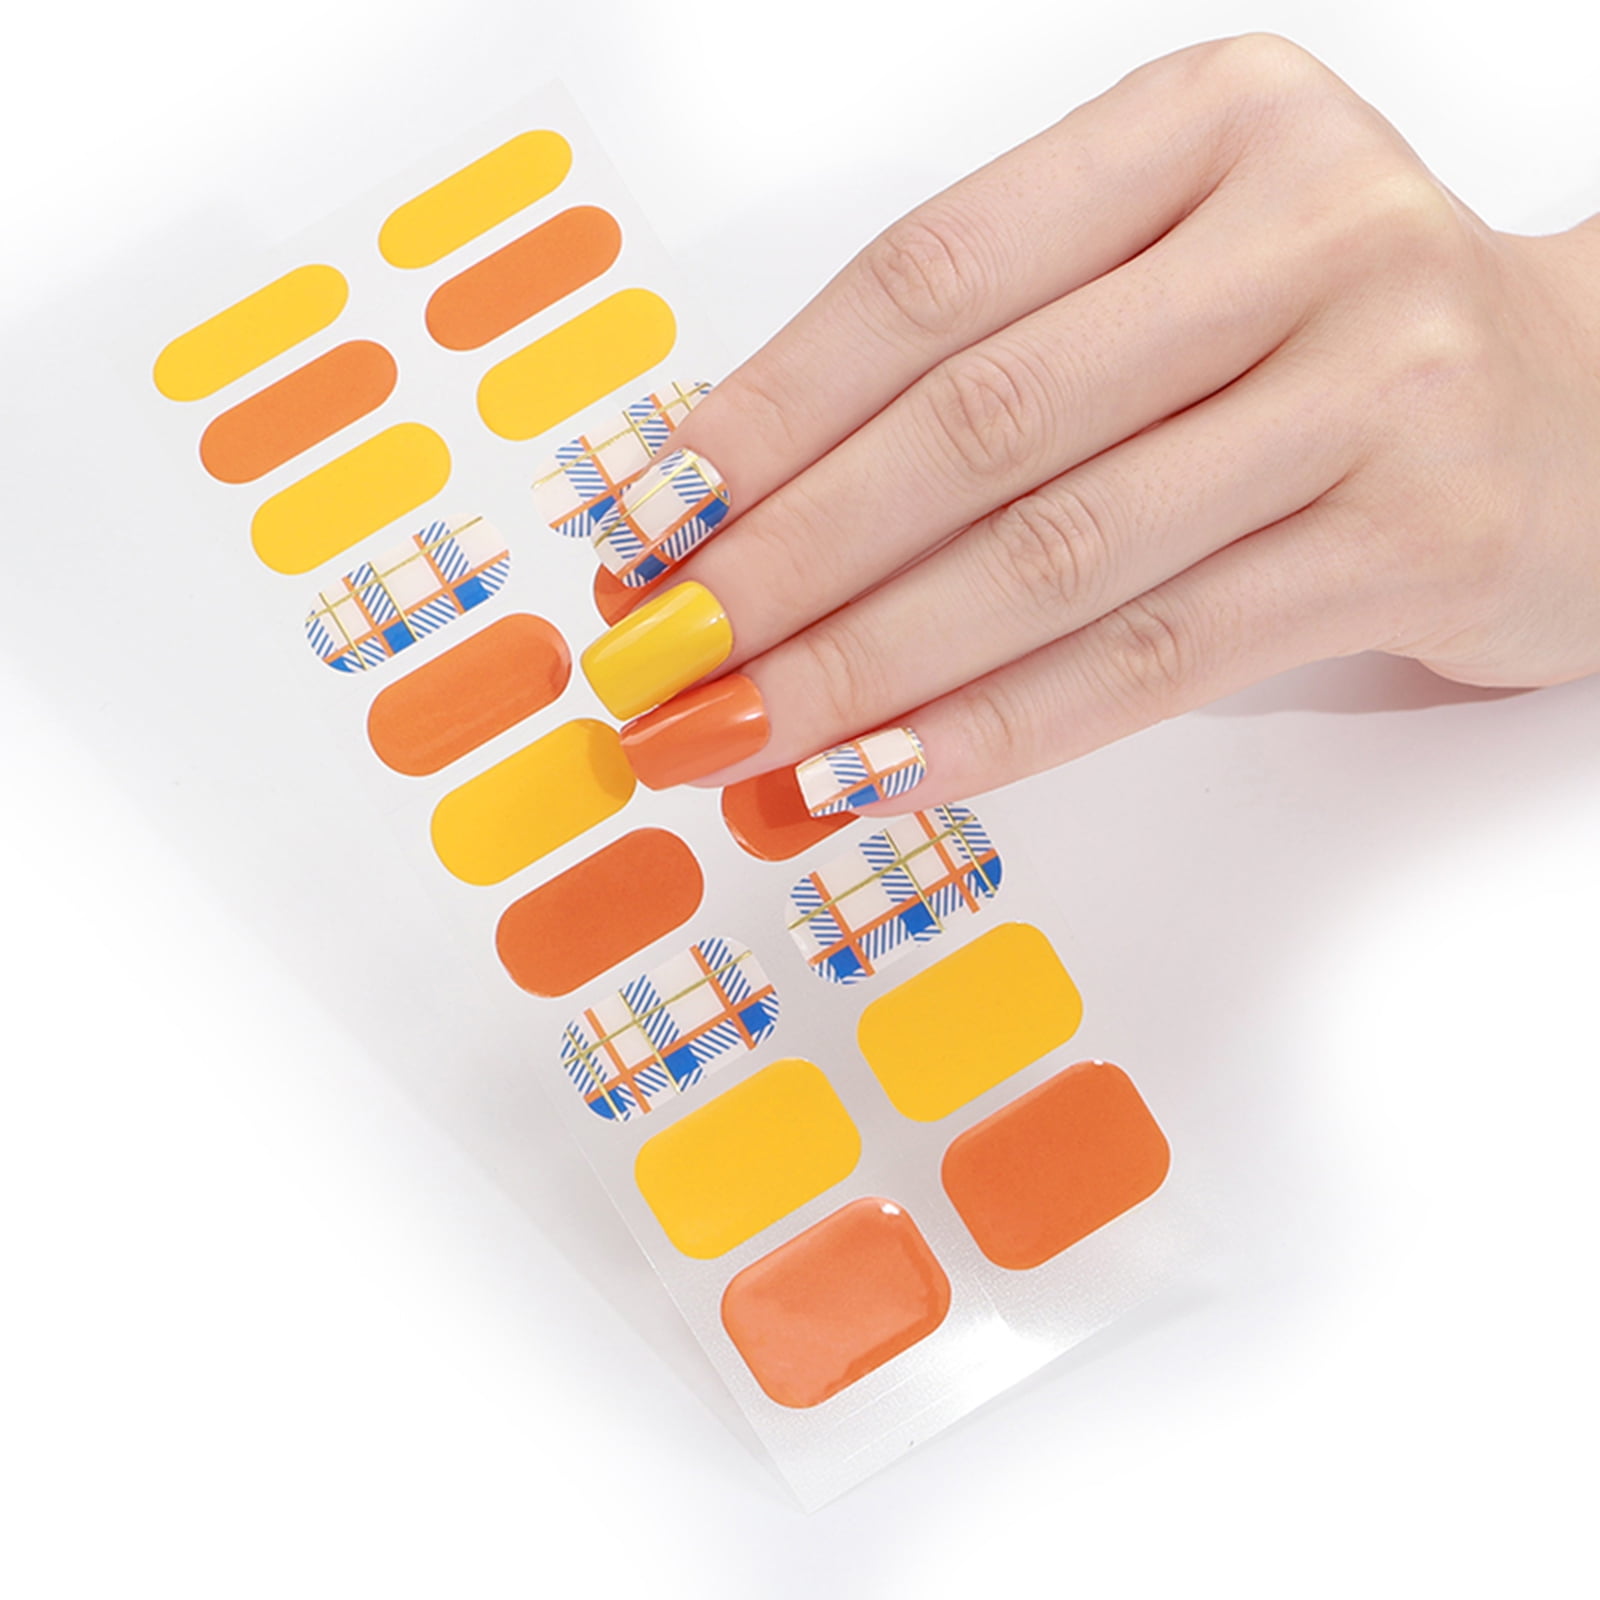 Good Luck Ready-to-Wear Nail Art Stickers – Cirque Colors